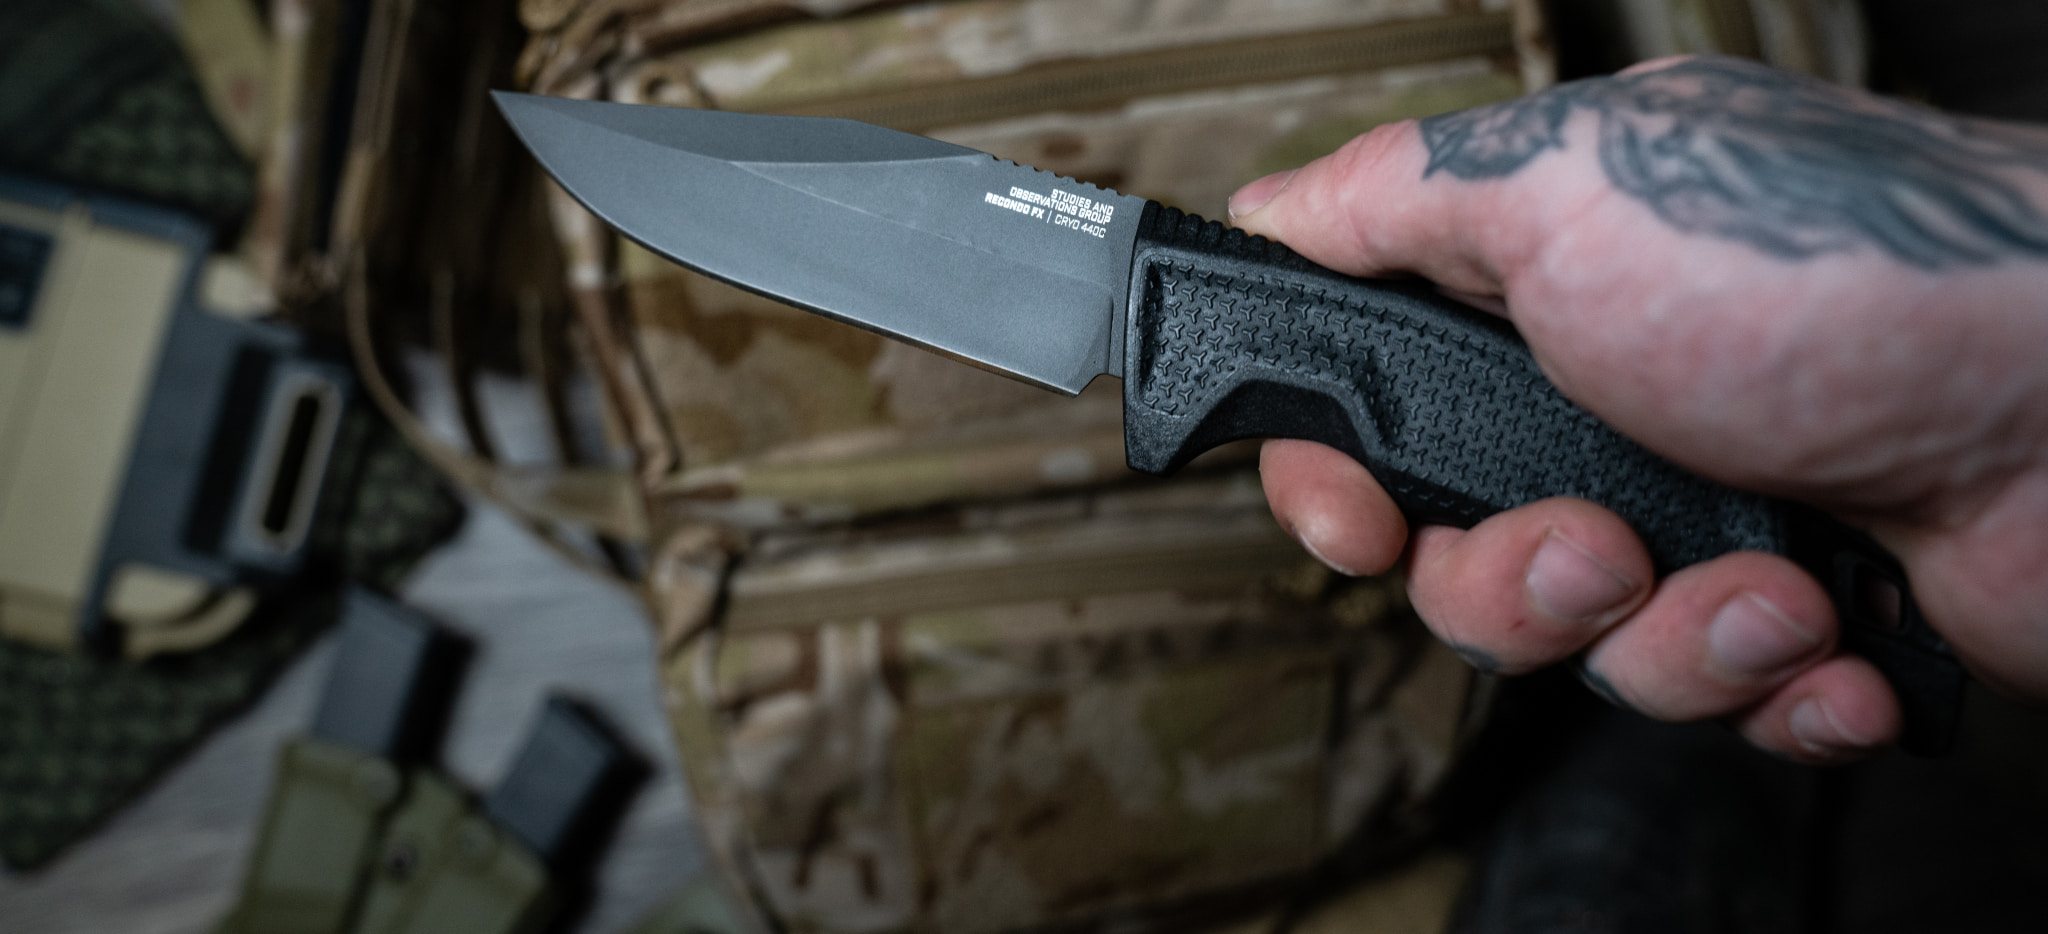 Altair FX - Dusk Purple  Outdoor Use Fixed Blade